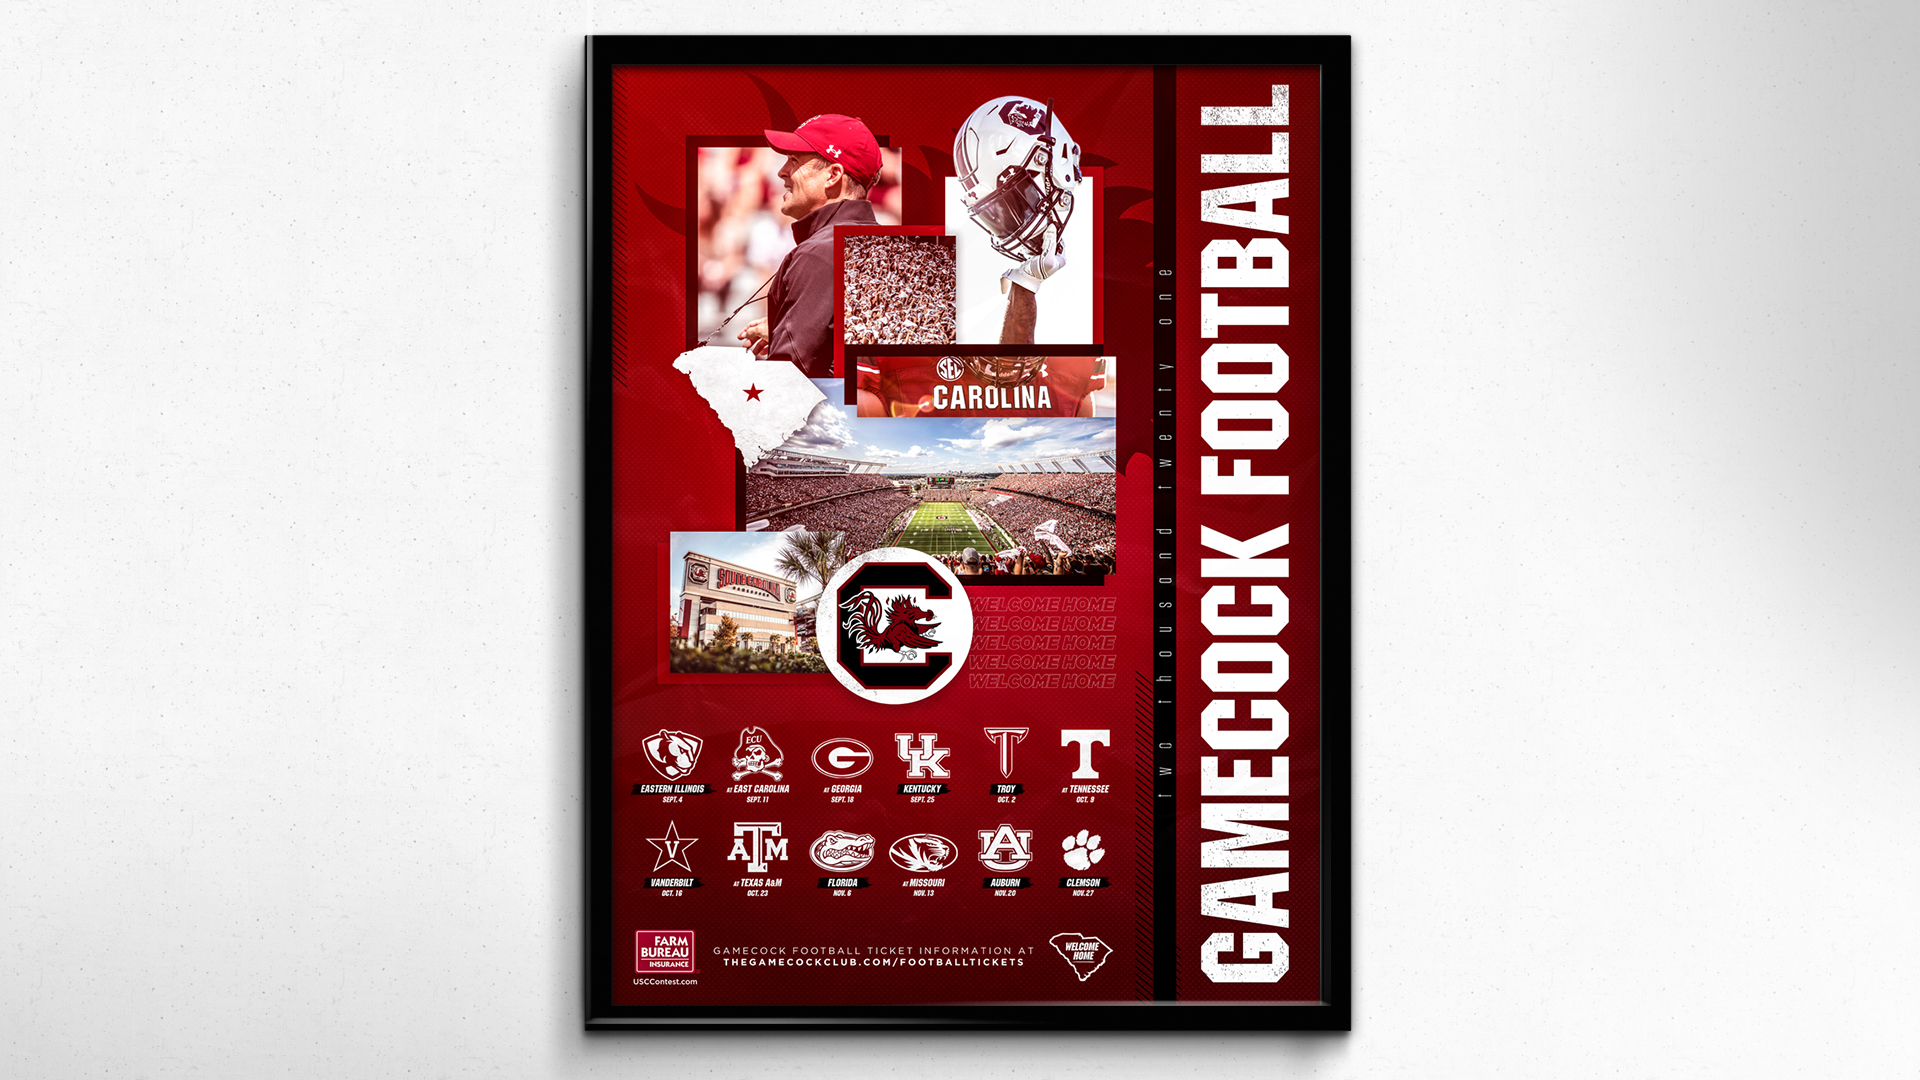 South Carolina 2021 Football Schedule Poster Available Now